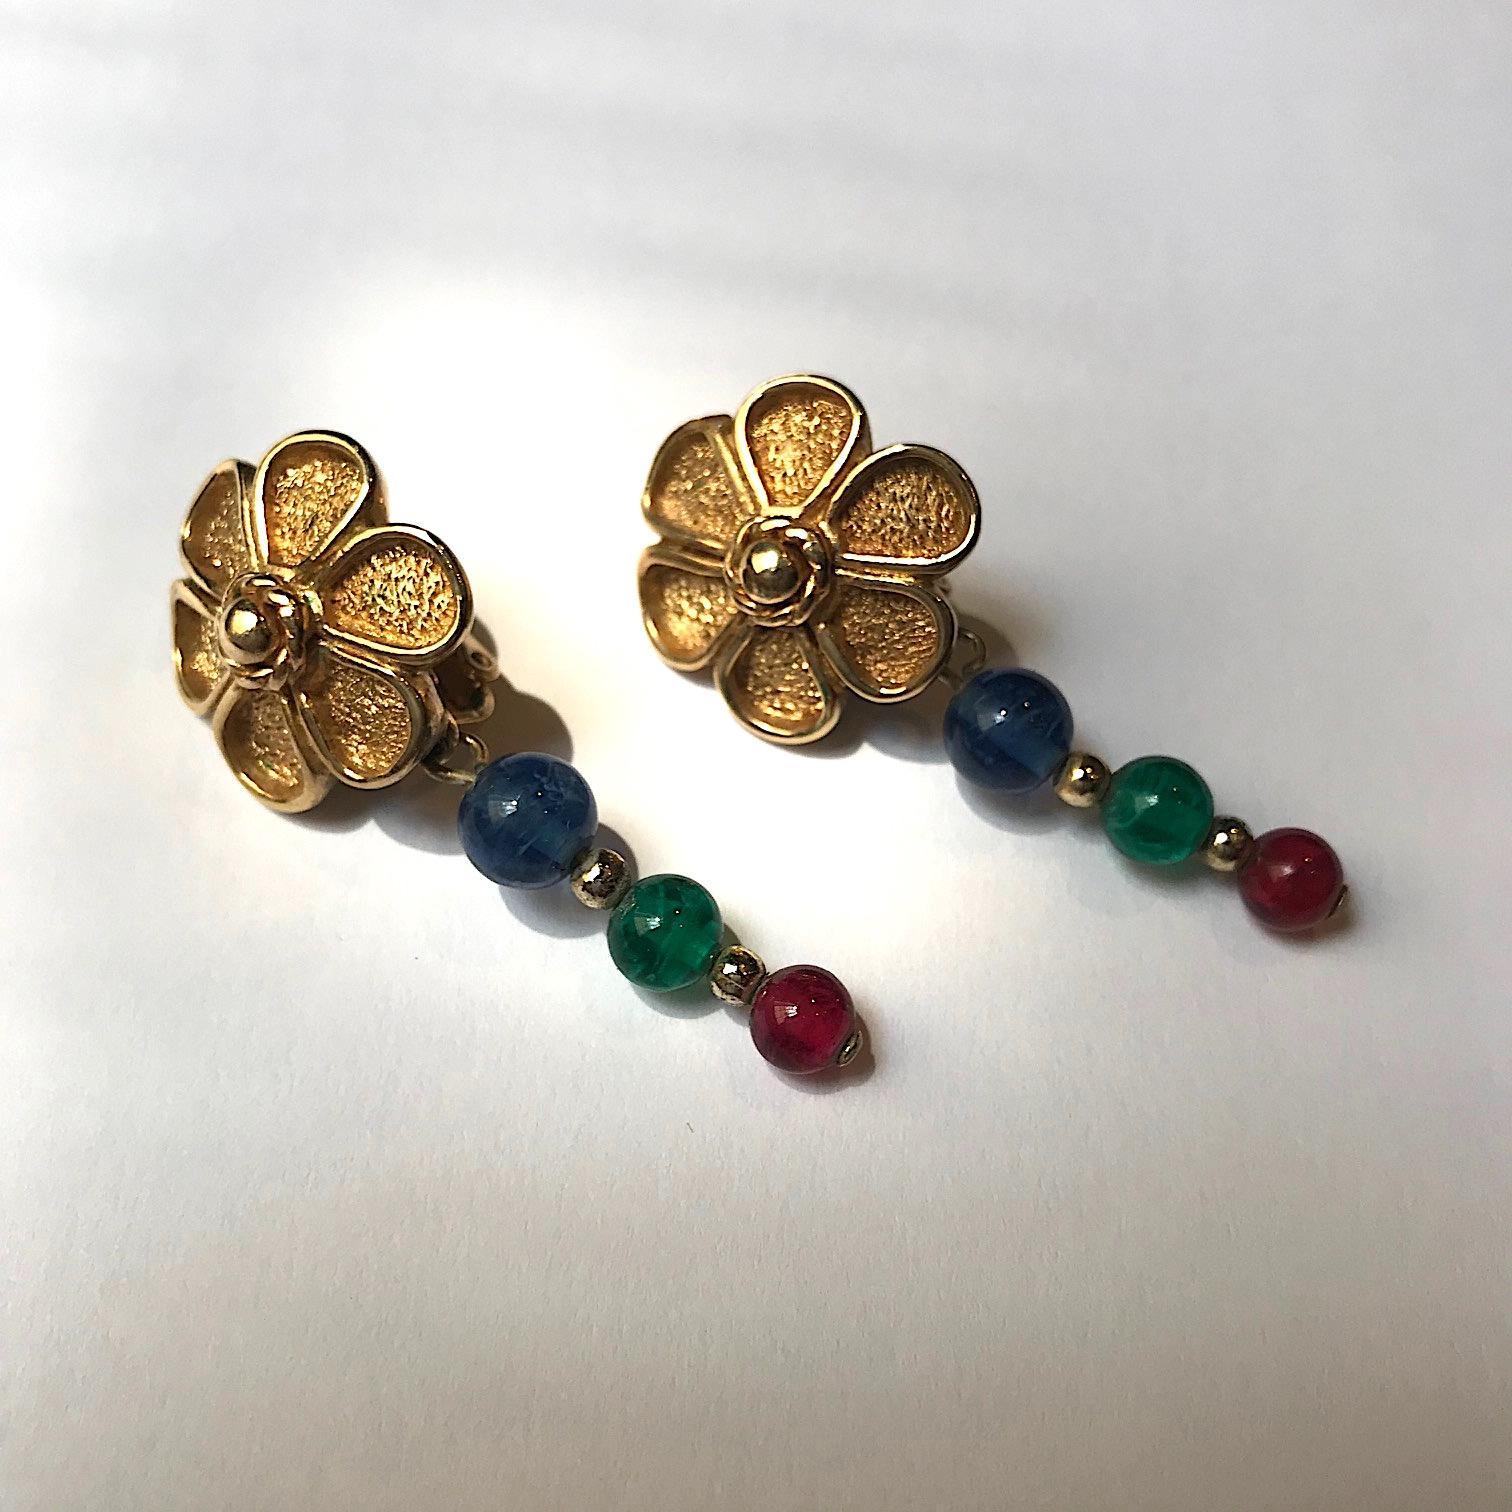 Grosse Germany 1980s Flower Earrings with Red, Blue & Green Beads 2